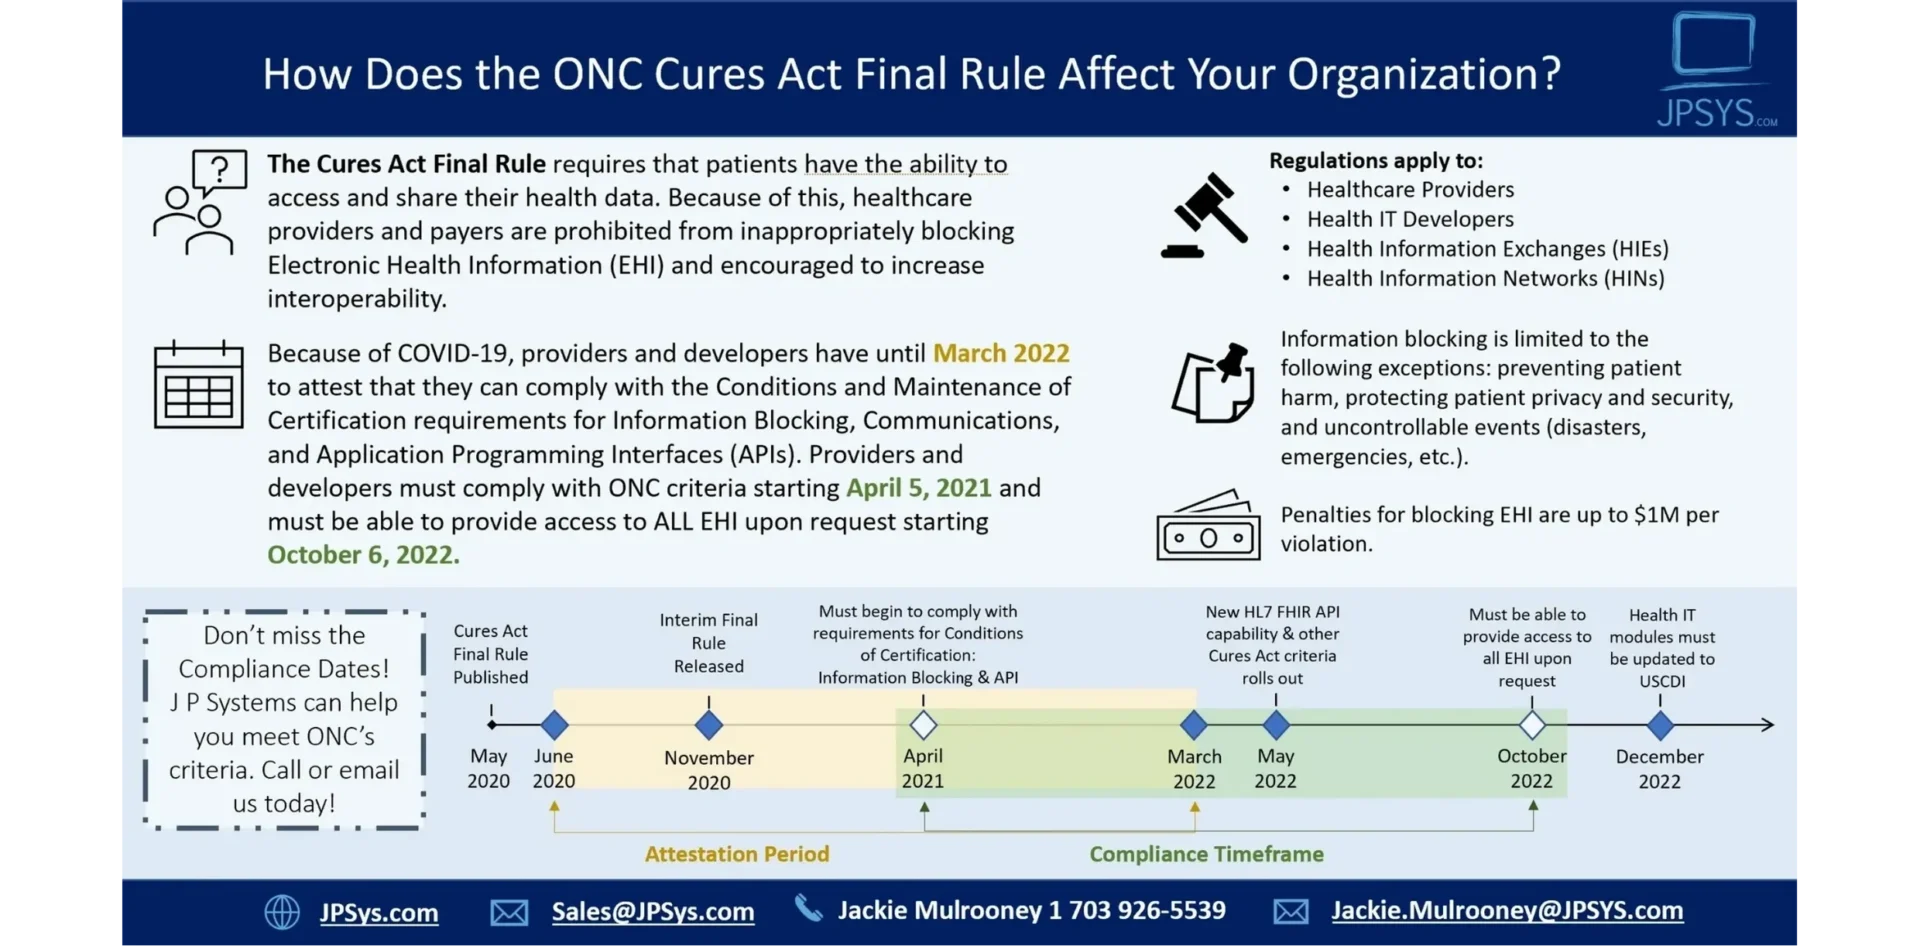 How does the ONC cures act final rule affect your organization